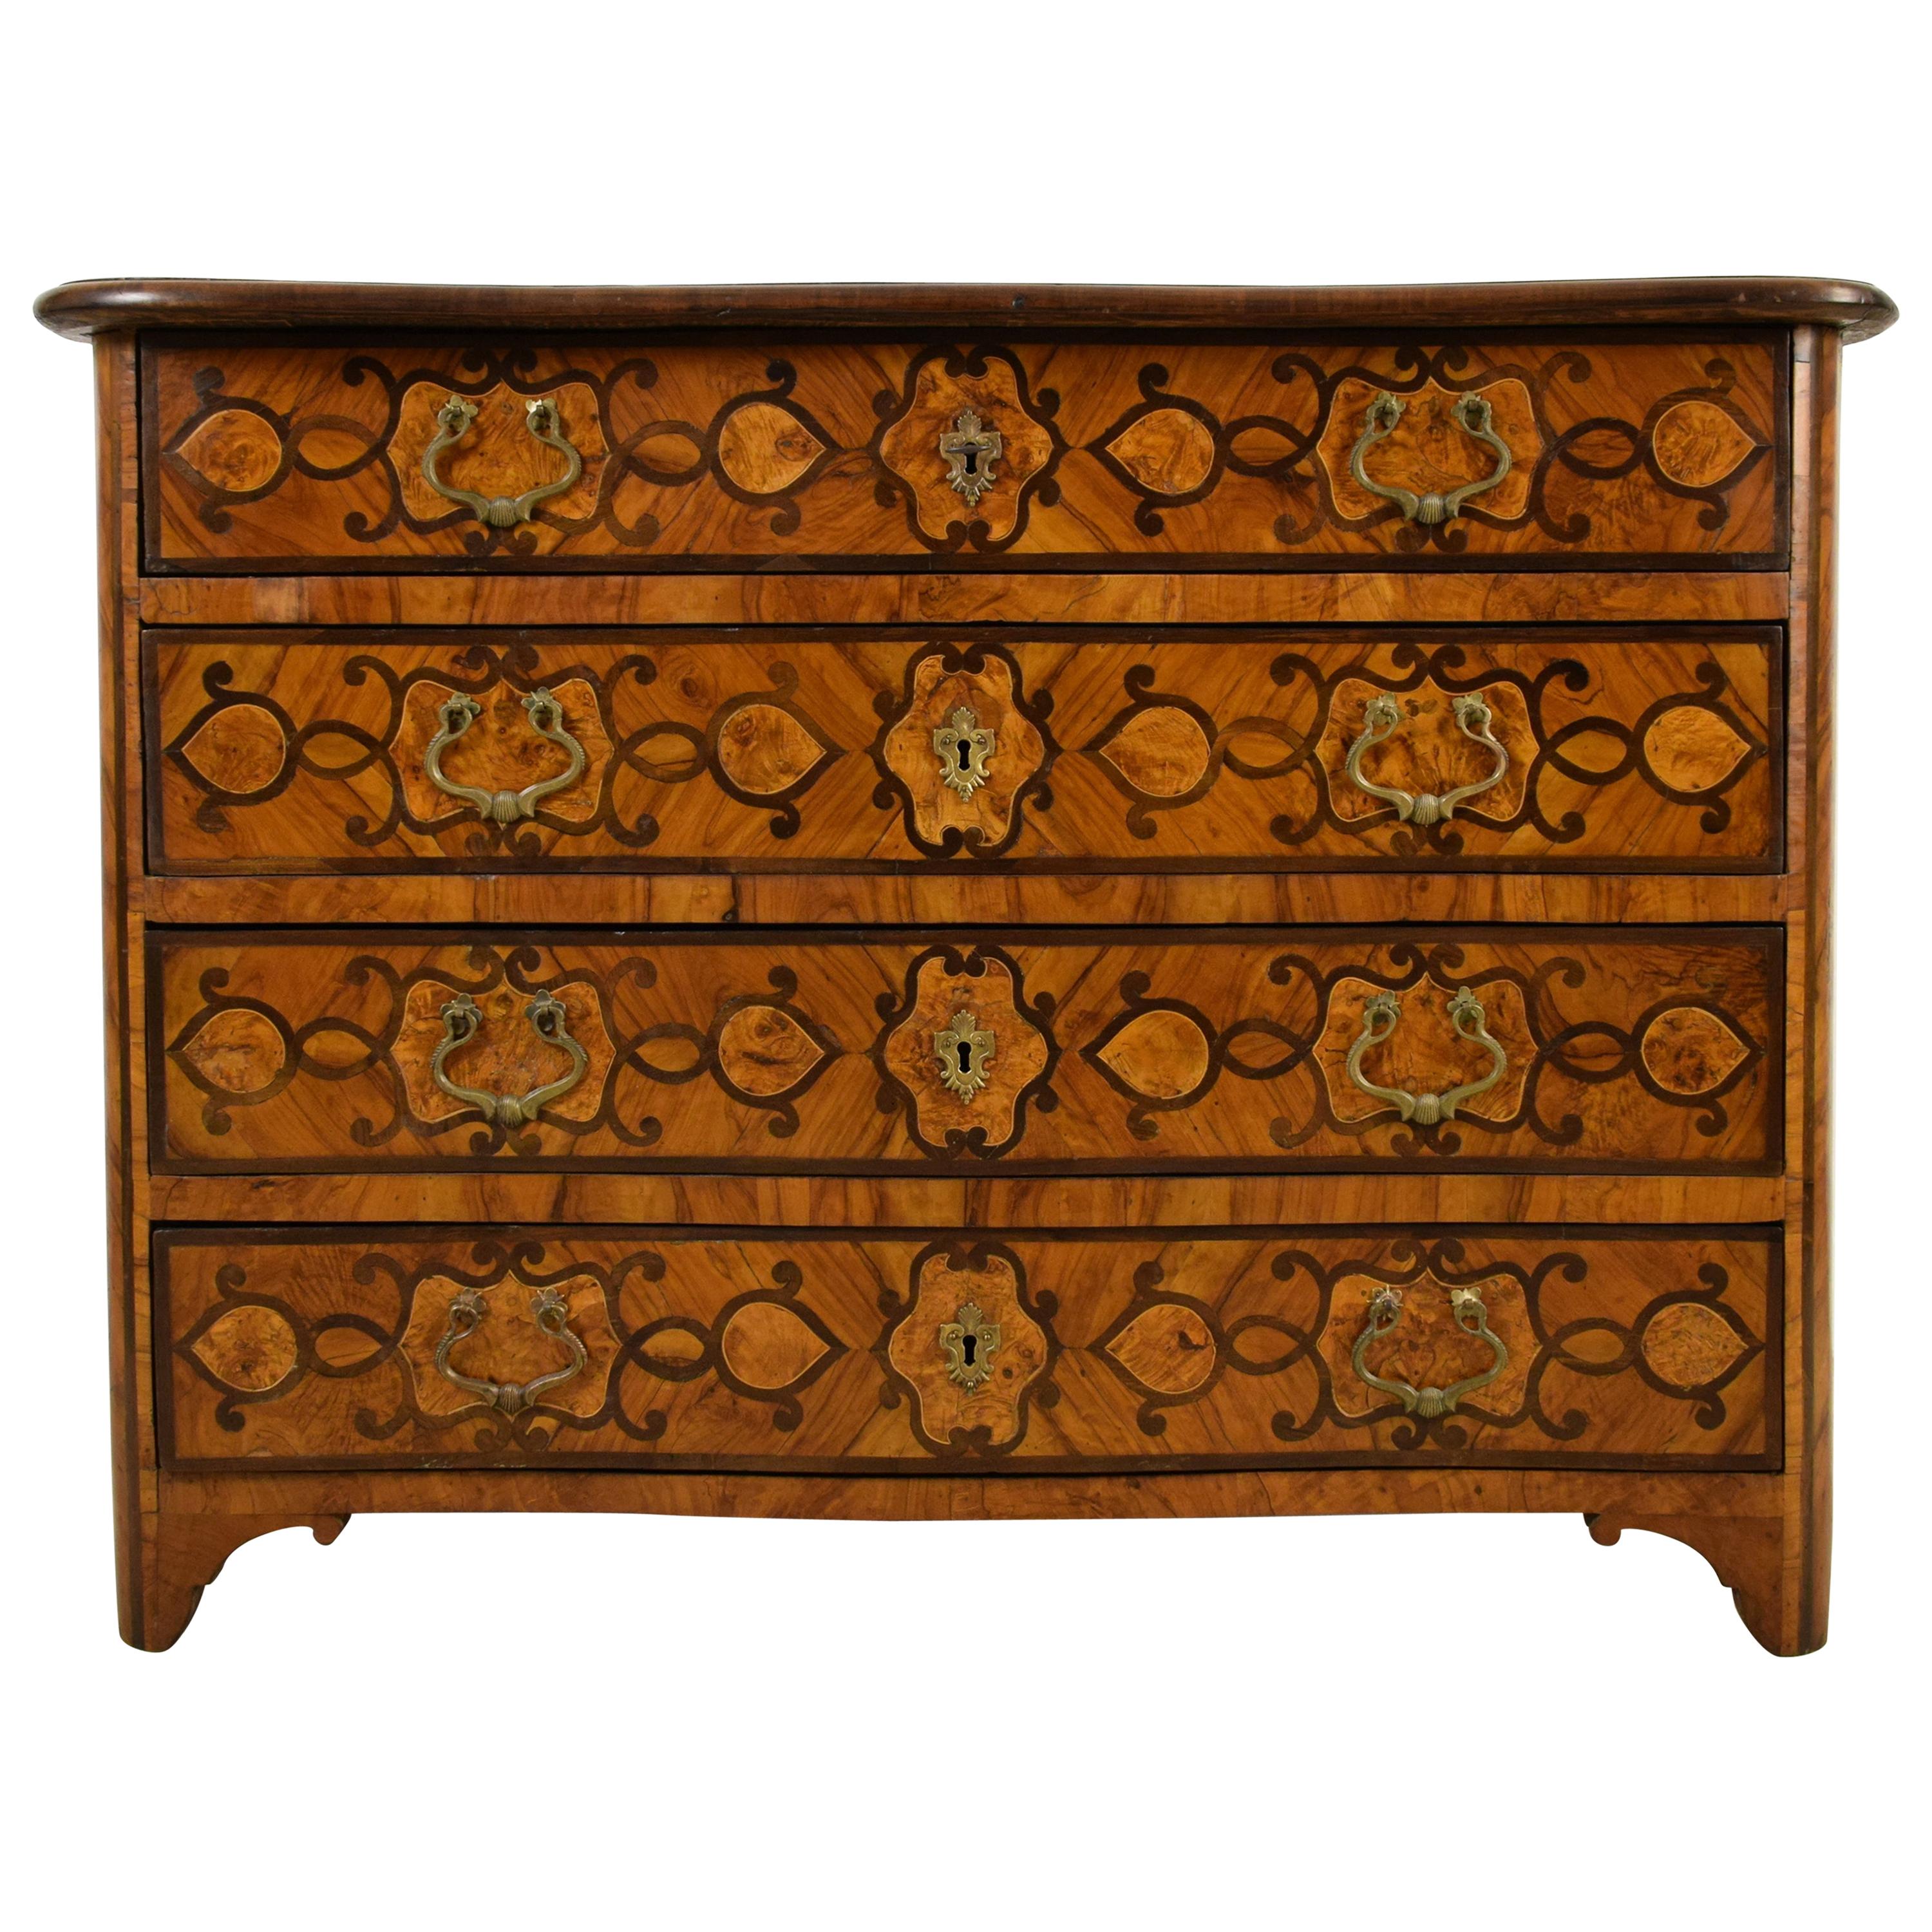 18th Century, Italian Olive Wood Paved and Inlaid Chest of Drawers